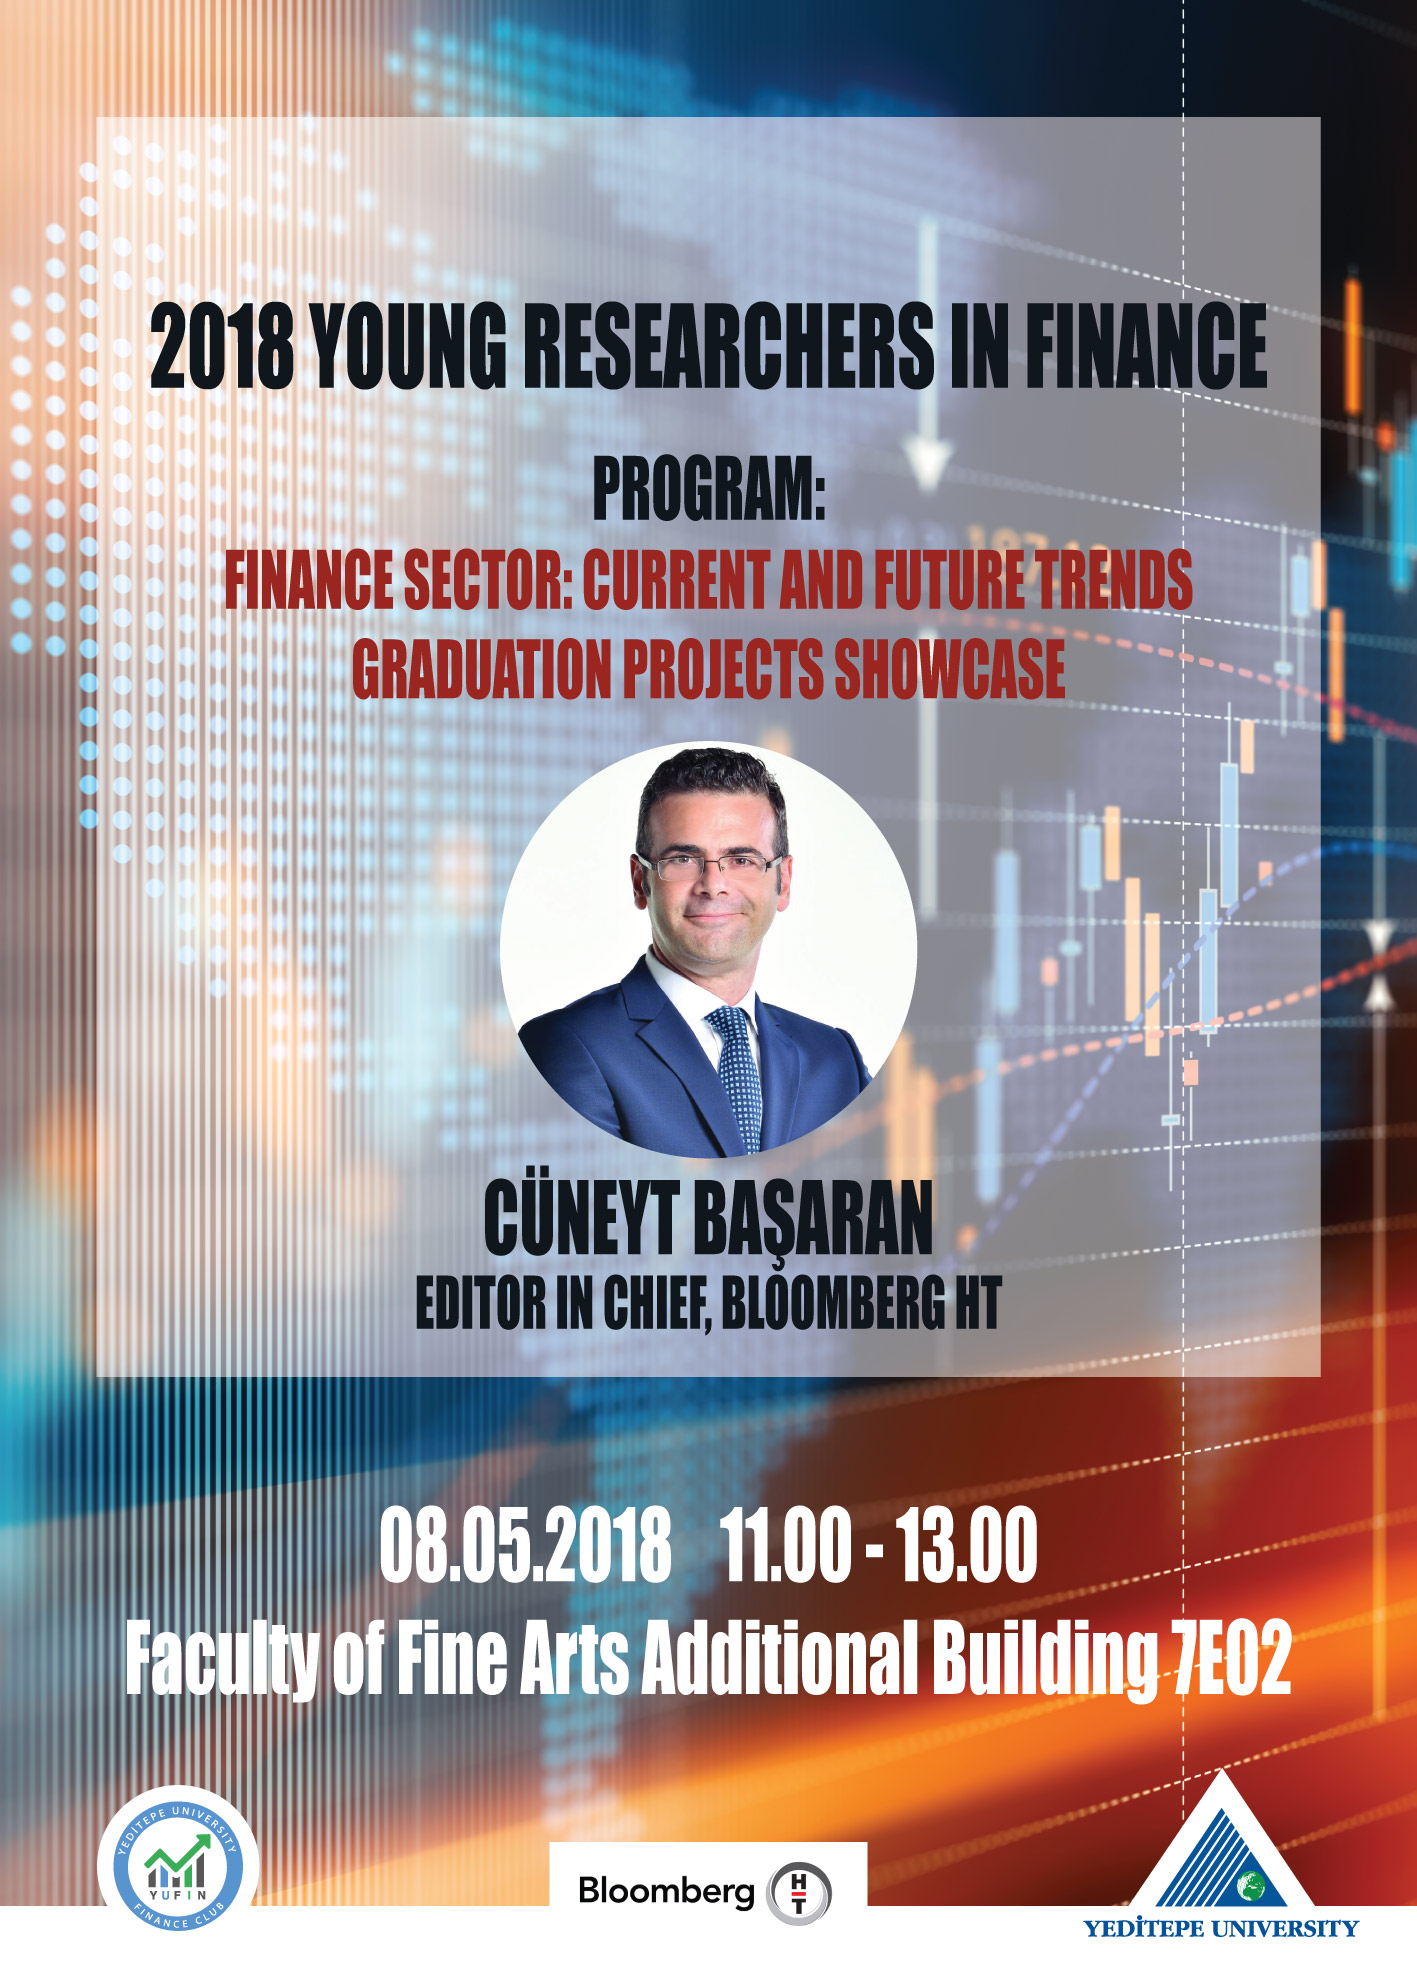 2018 YOUNG RESEARCHERS IN FINANCE 